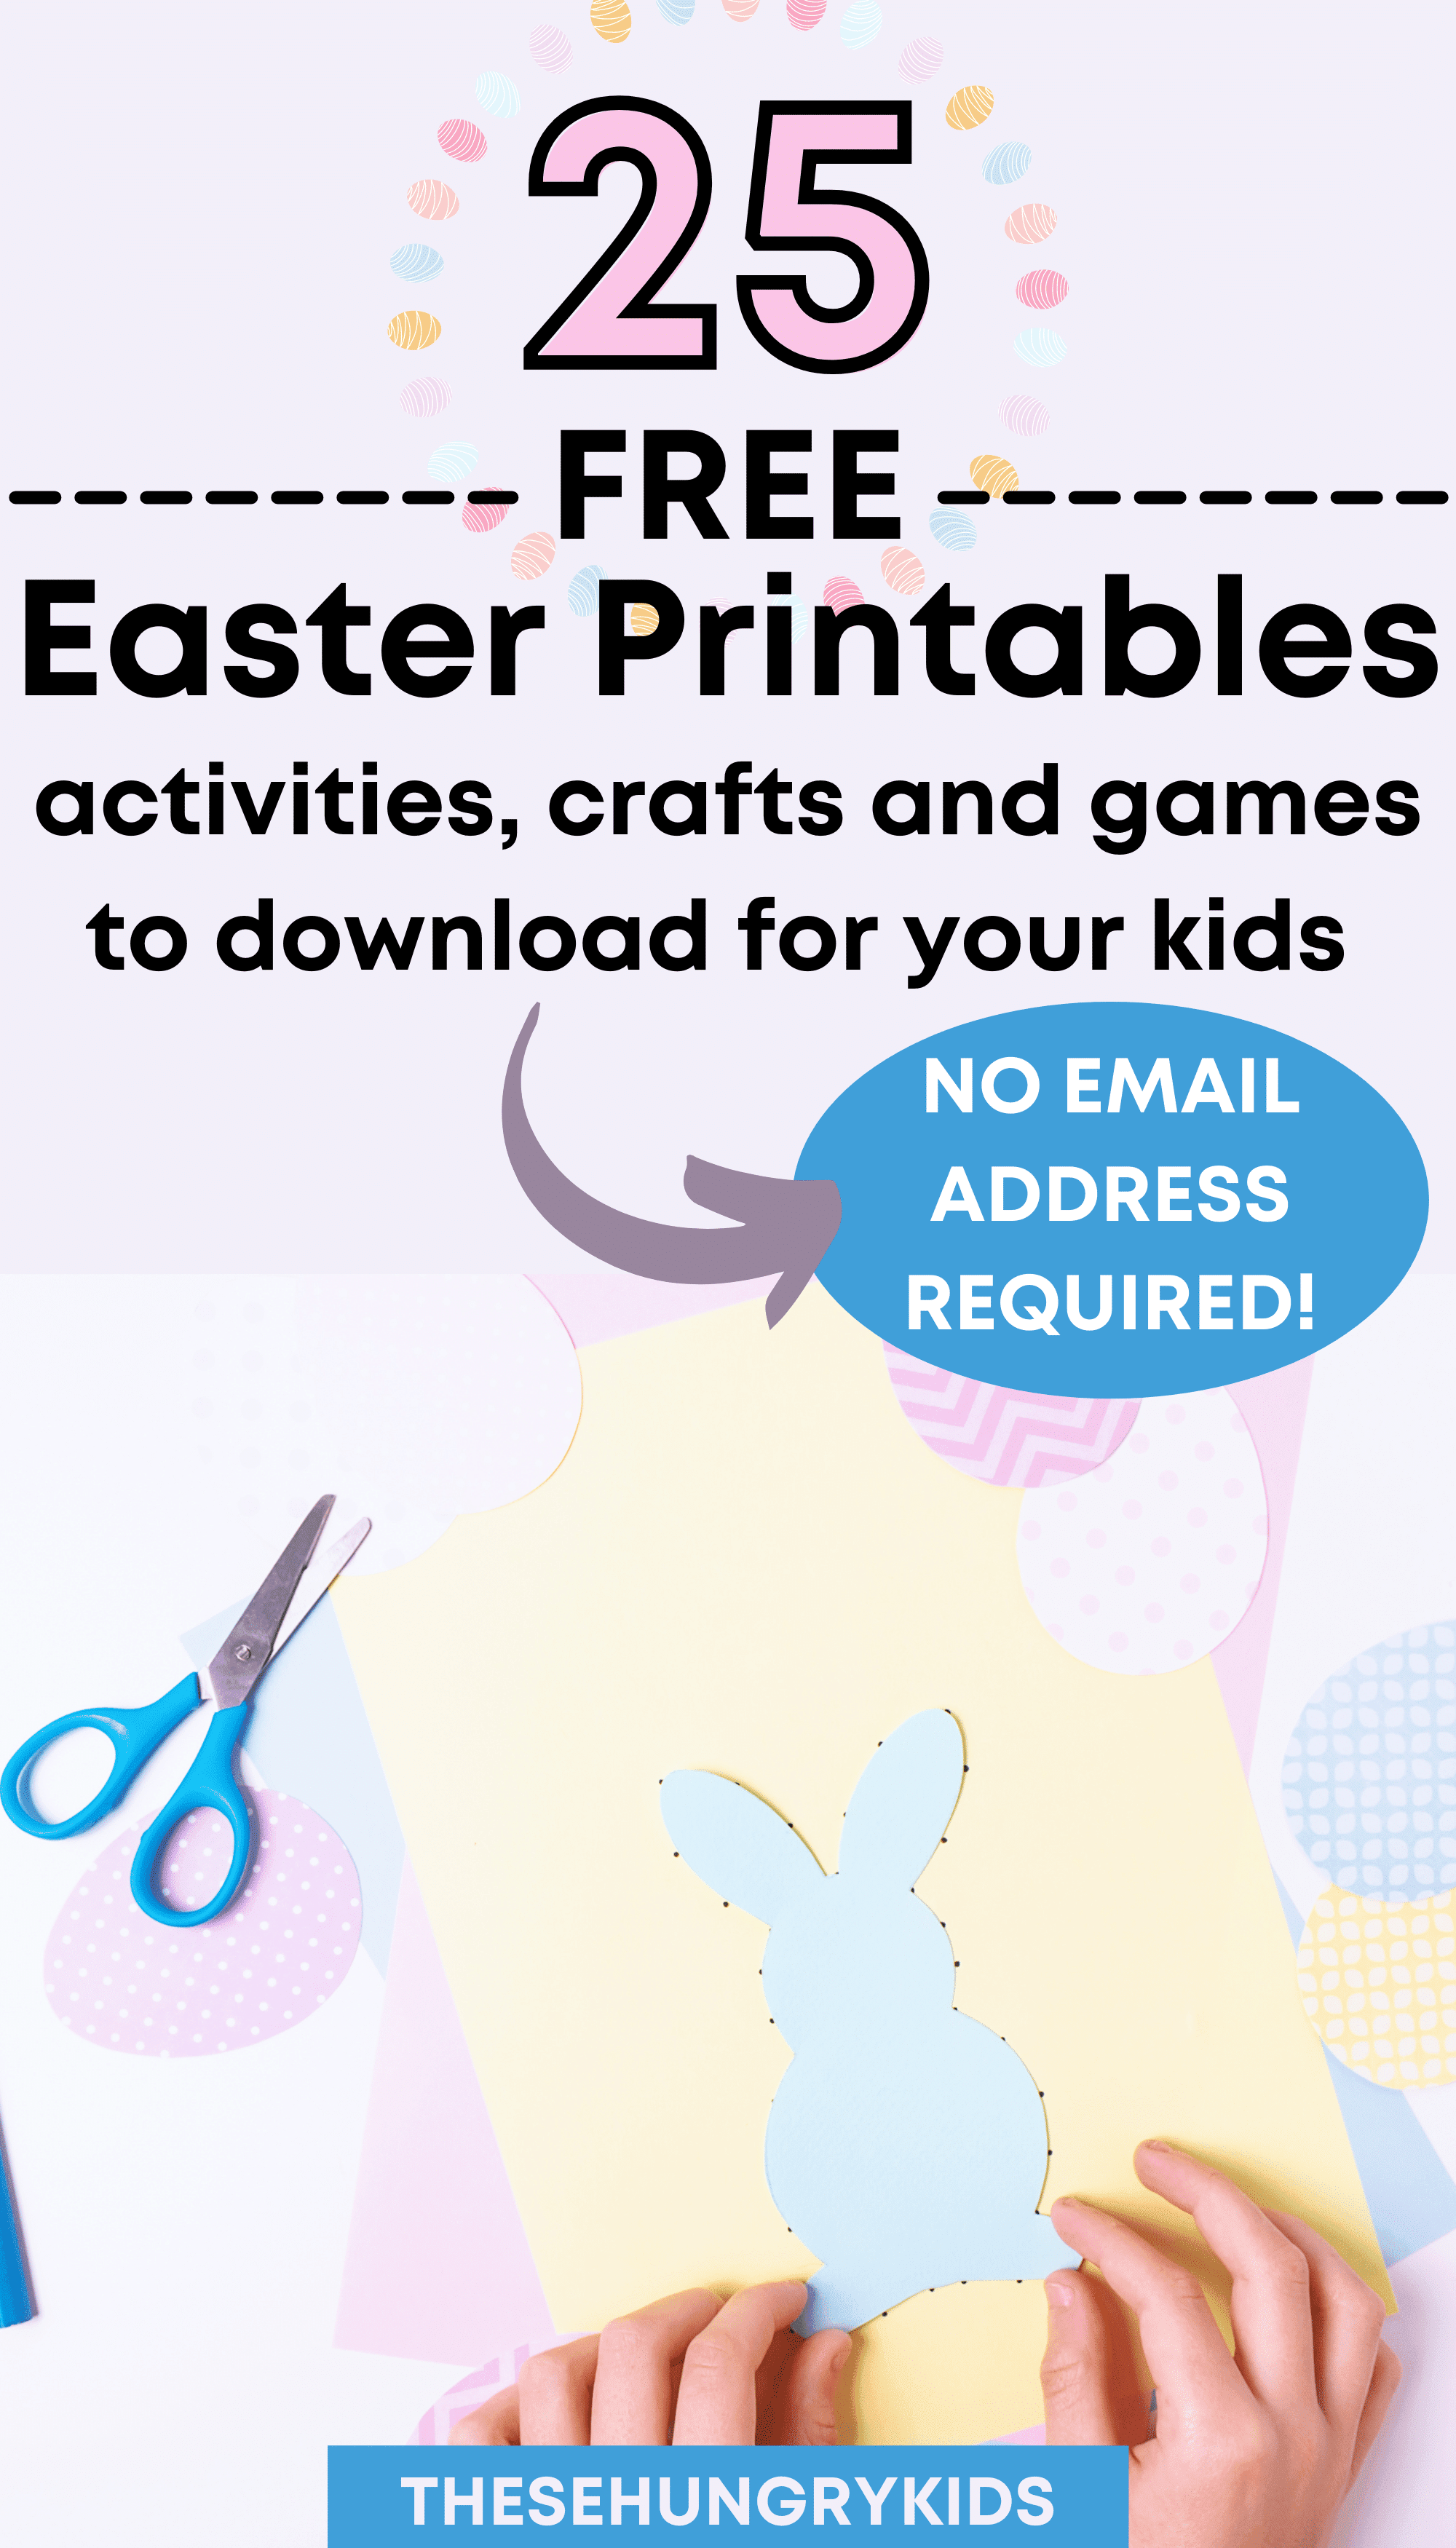 25-free-easter-printable-activities-games-and-more-no-e-mail-address